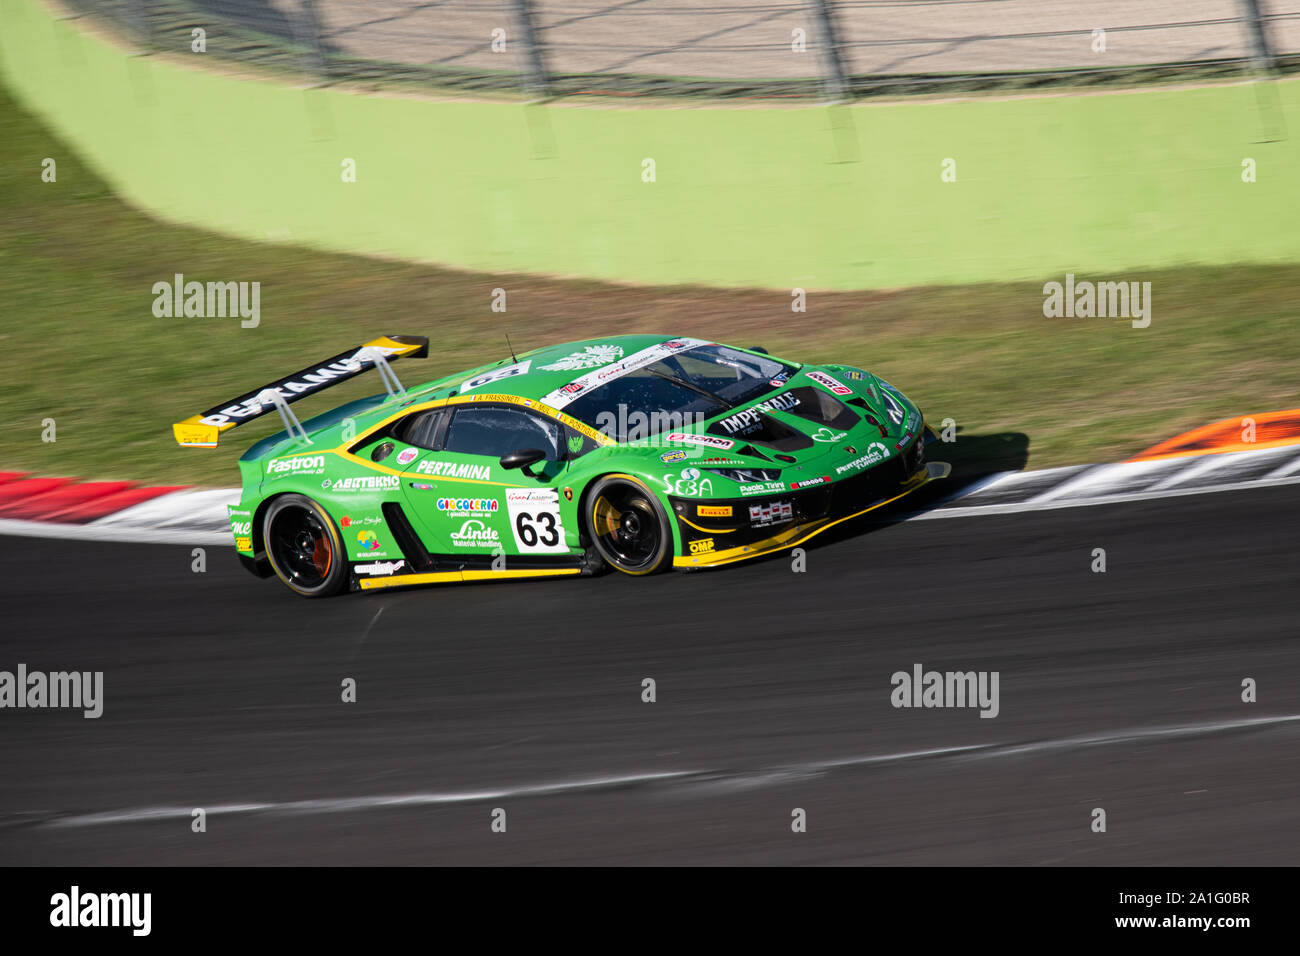 Vallelunga, Italy september 14 2019. Full length of racing Lamborghini Huracan racing car in action during race blurred motion background Stock Photo